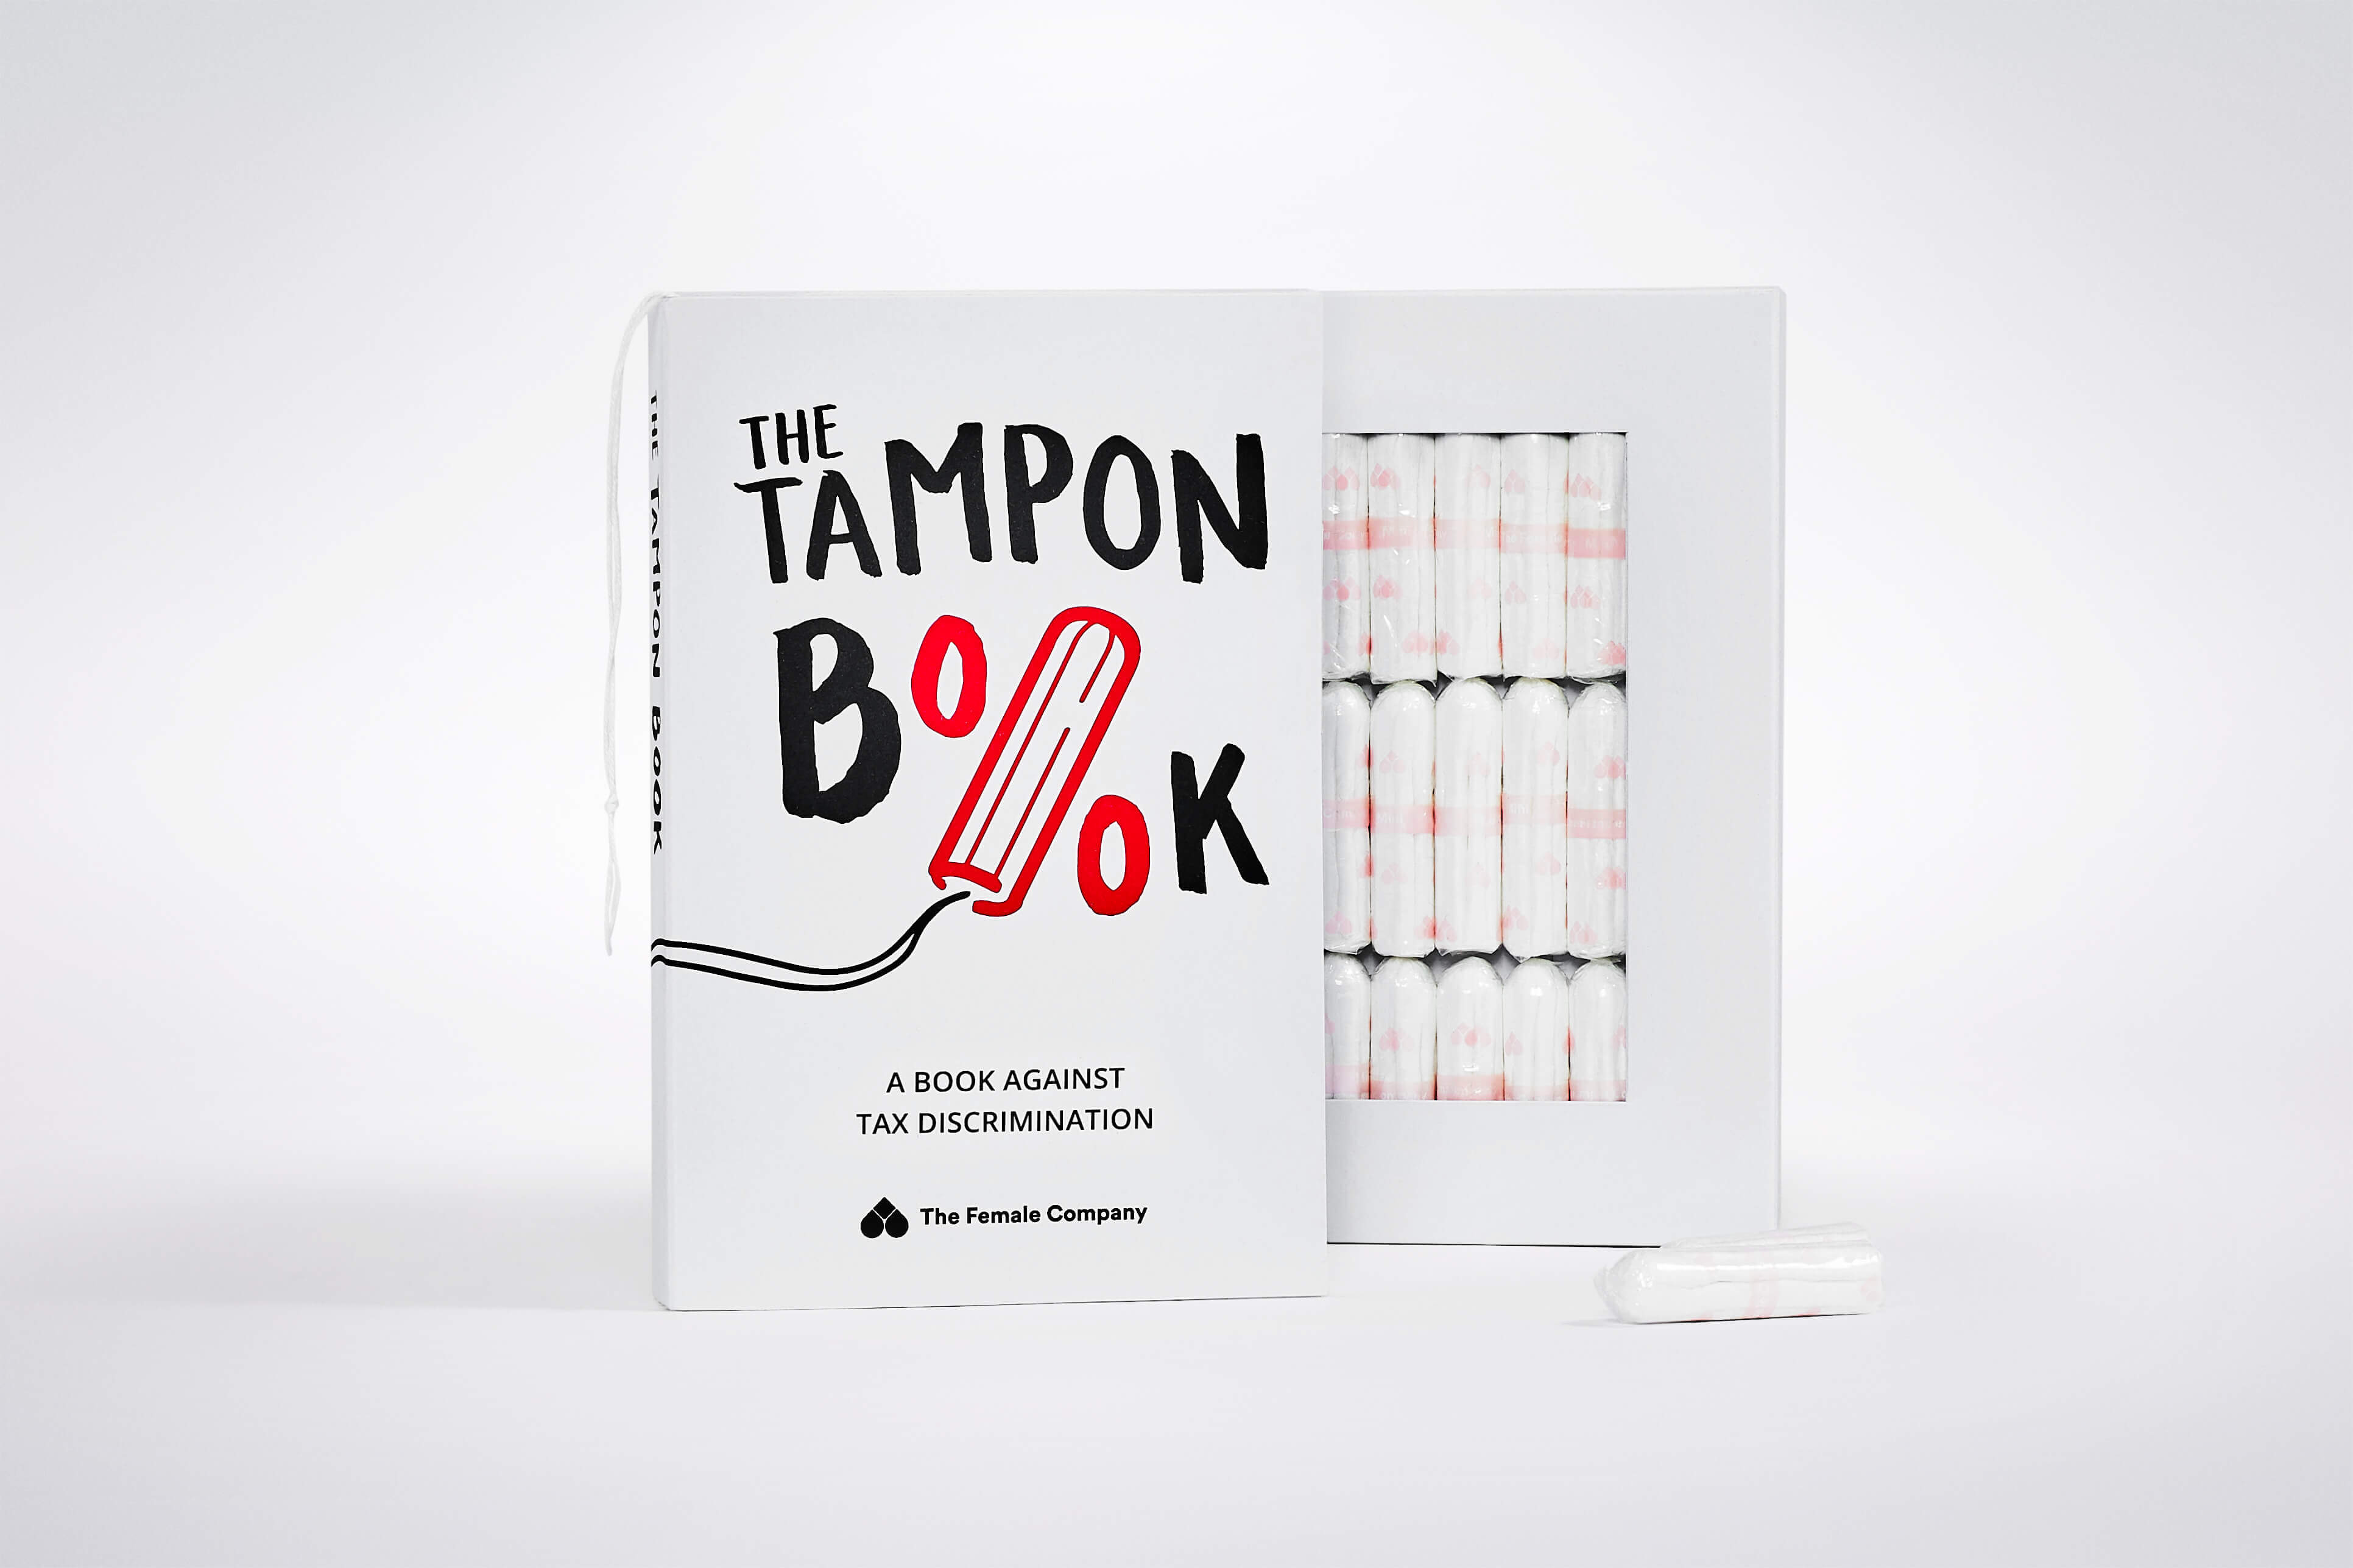 Packaging tampons as books: the subversive new way to avoid a sexist tax